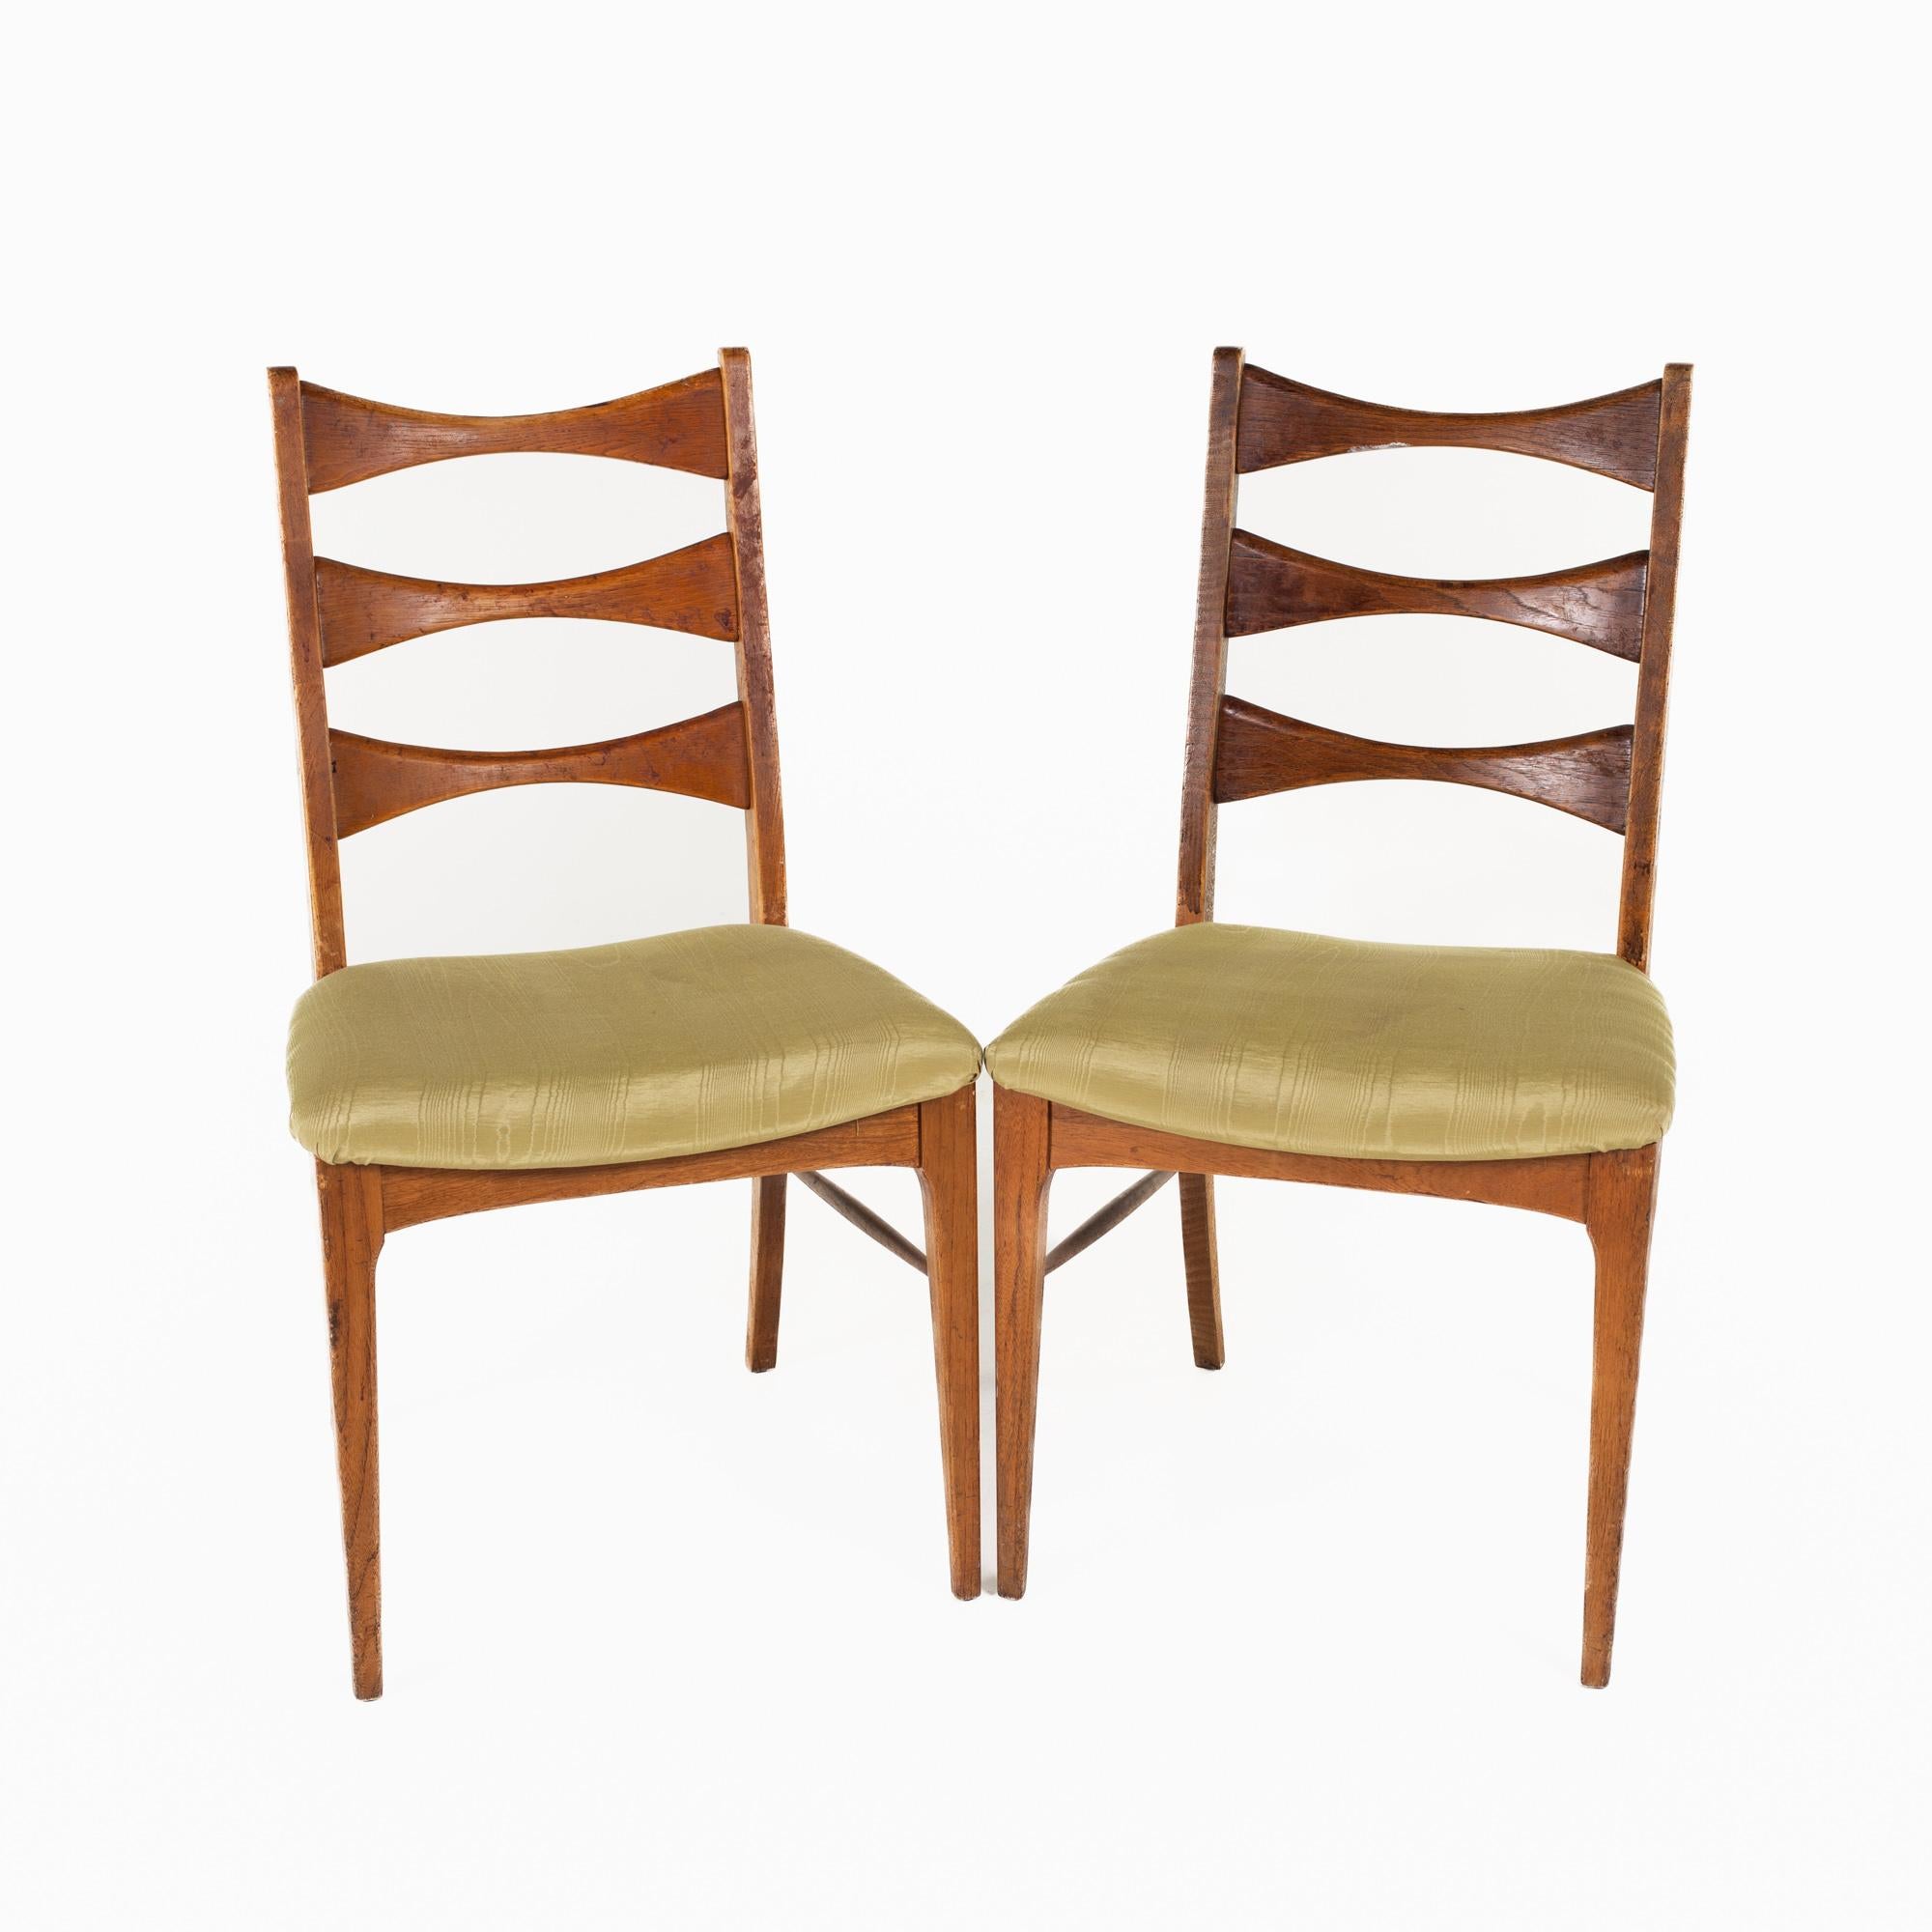 Heywood Wakefield style mid century ladder back chairs - Pair

Each chair measures: 20 wide x 21 deep x 37 inches high, with a seat height of 18.25 inches

All pieces of furniture can be had in what we call restored vintage condition. That means